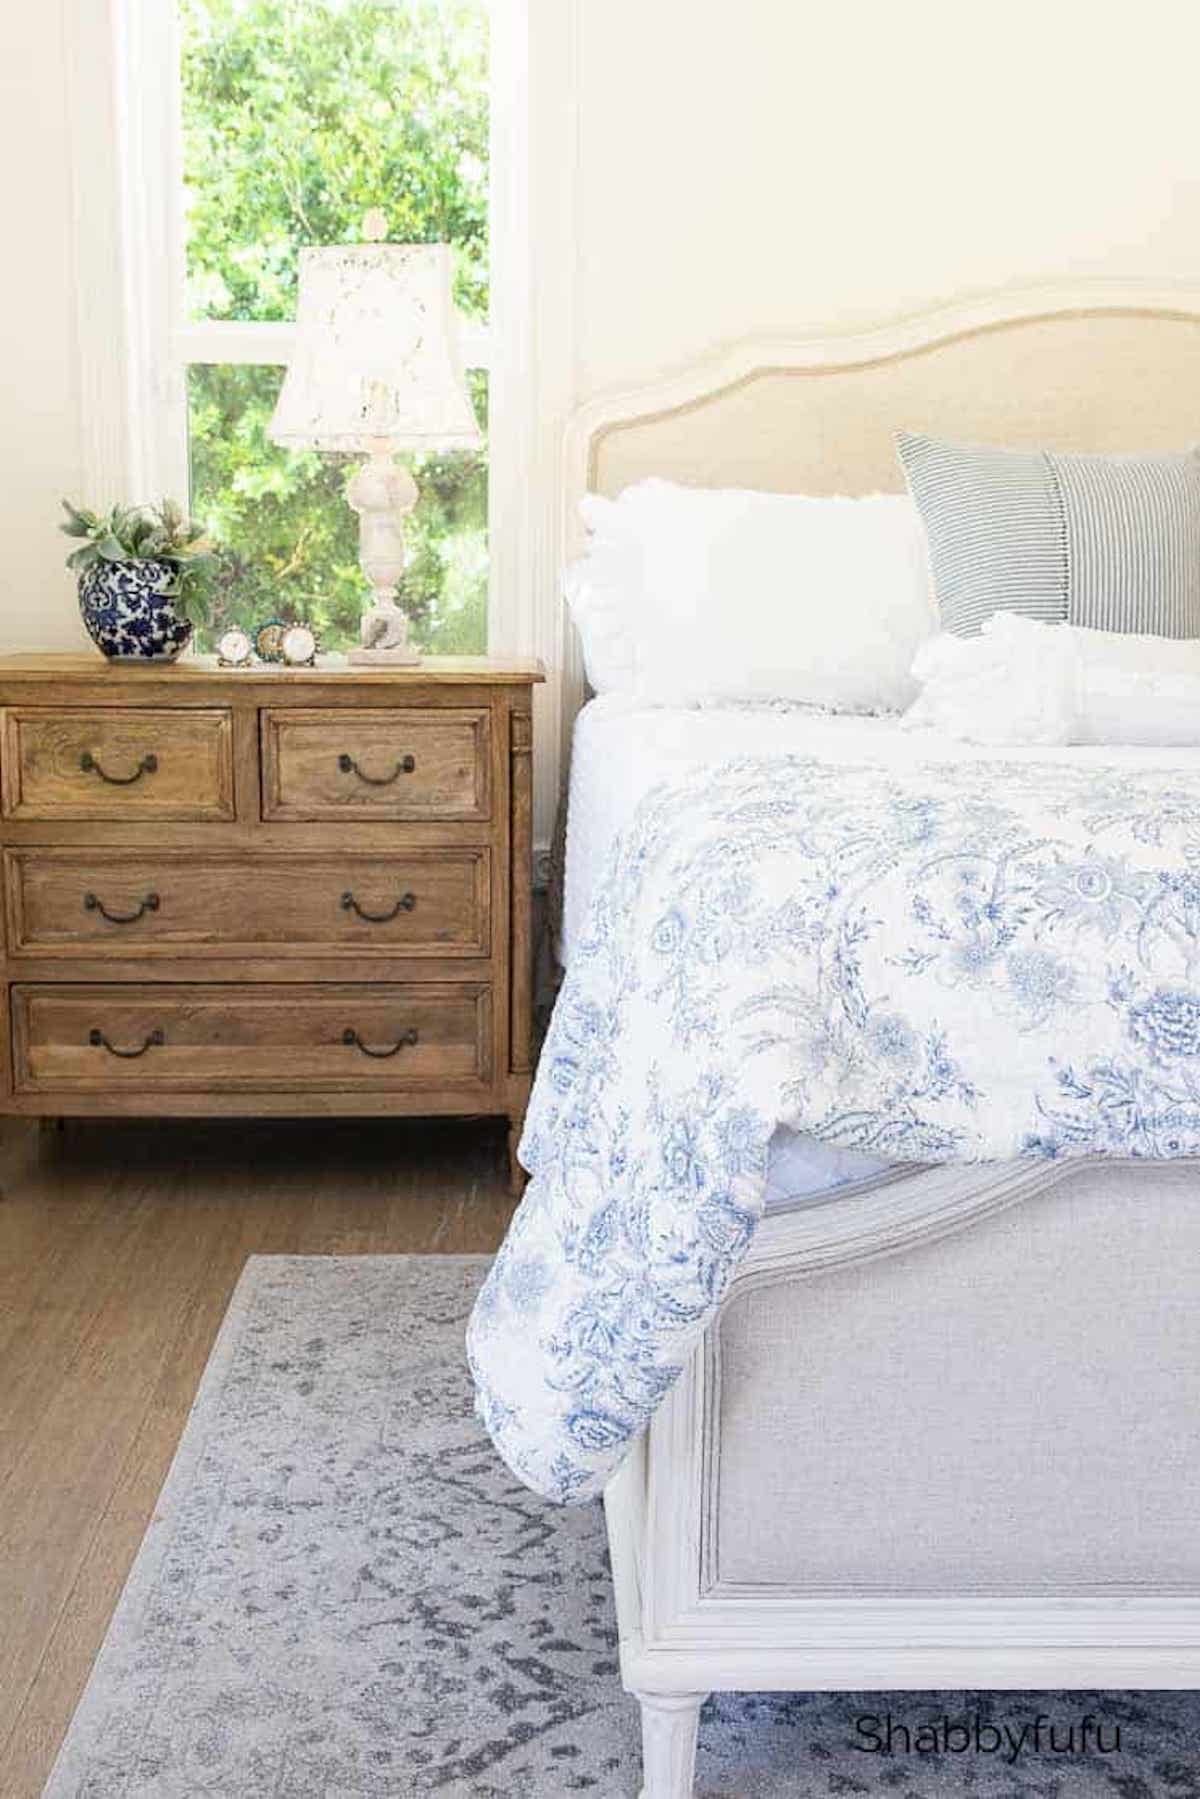 Things To Put Under A Cloche, Soft Bedroom Ideas For Summer & More! French Country Fridays 380